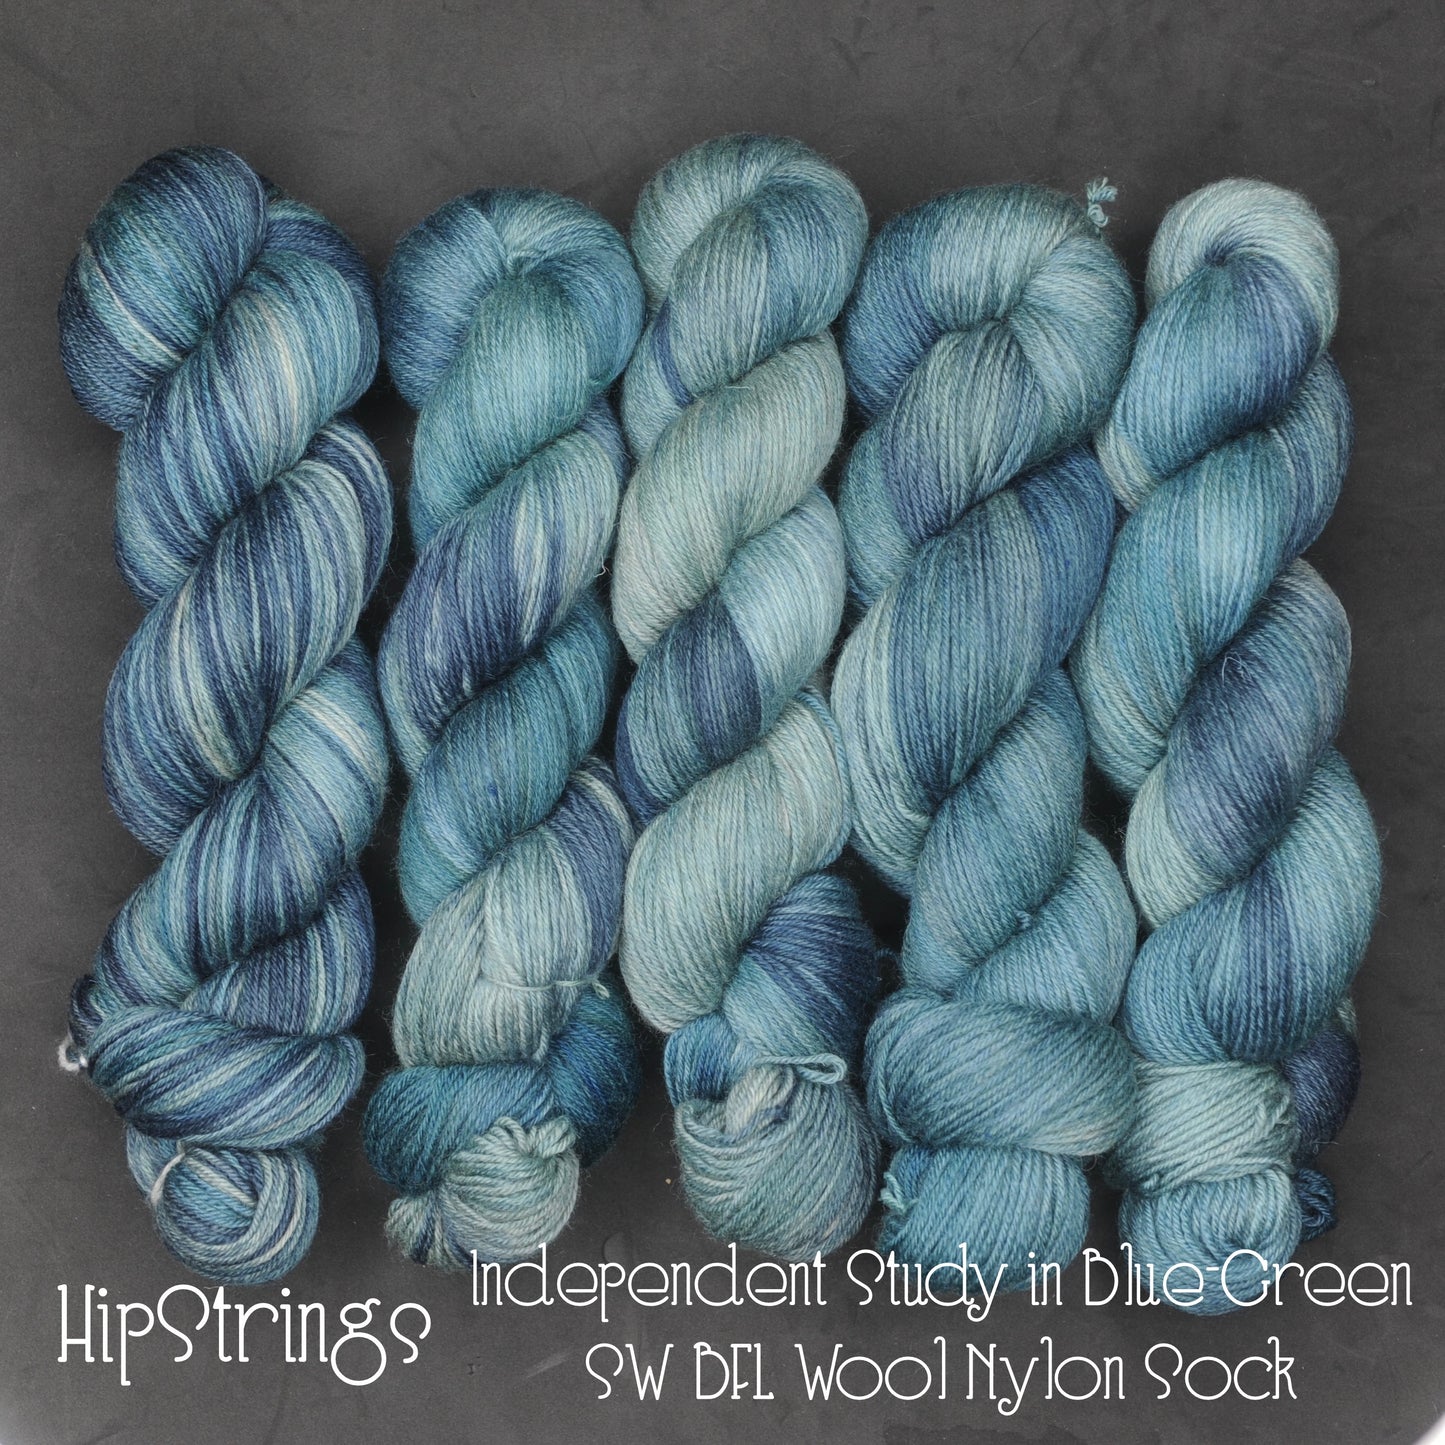 Independent Study in Blue Greens on Extra Credit SW BFL Nylon Sock yarn - 437 yd/100g